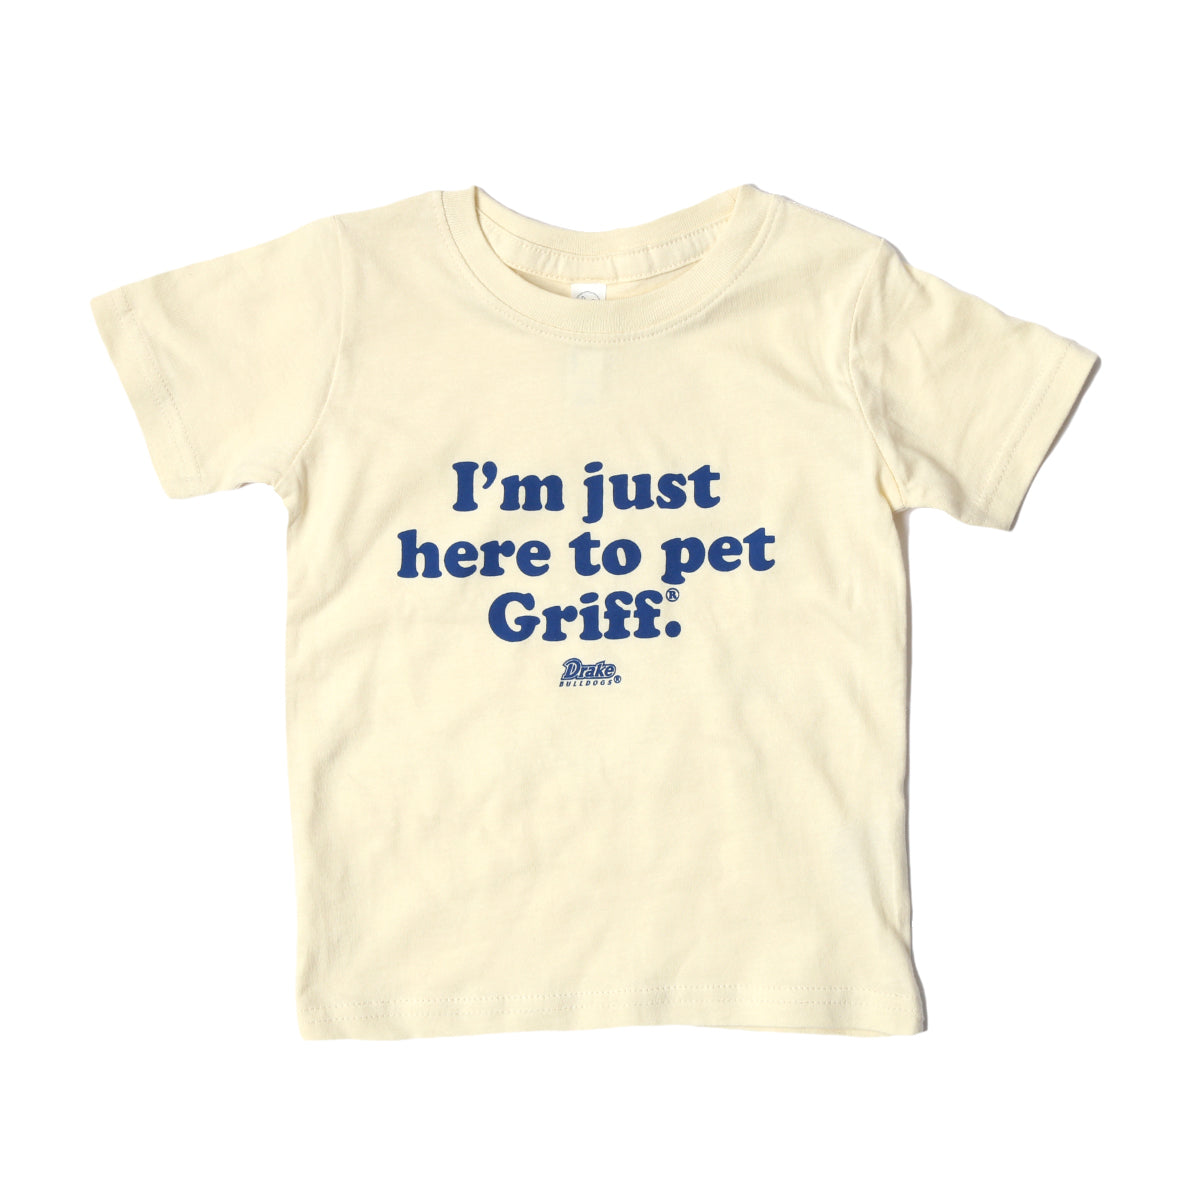 I'm Just Here to Pet Griff Kids T-Shirt